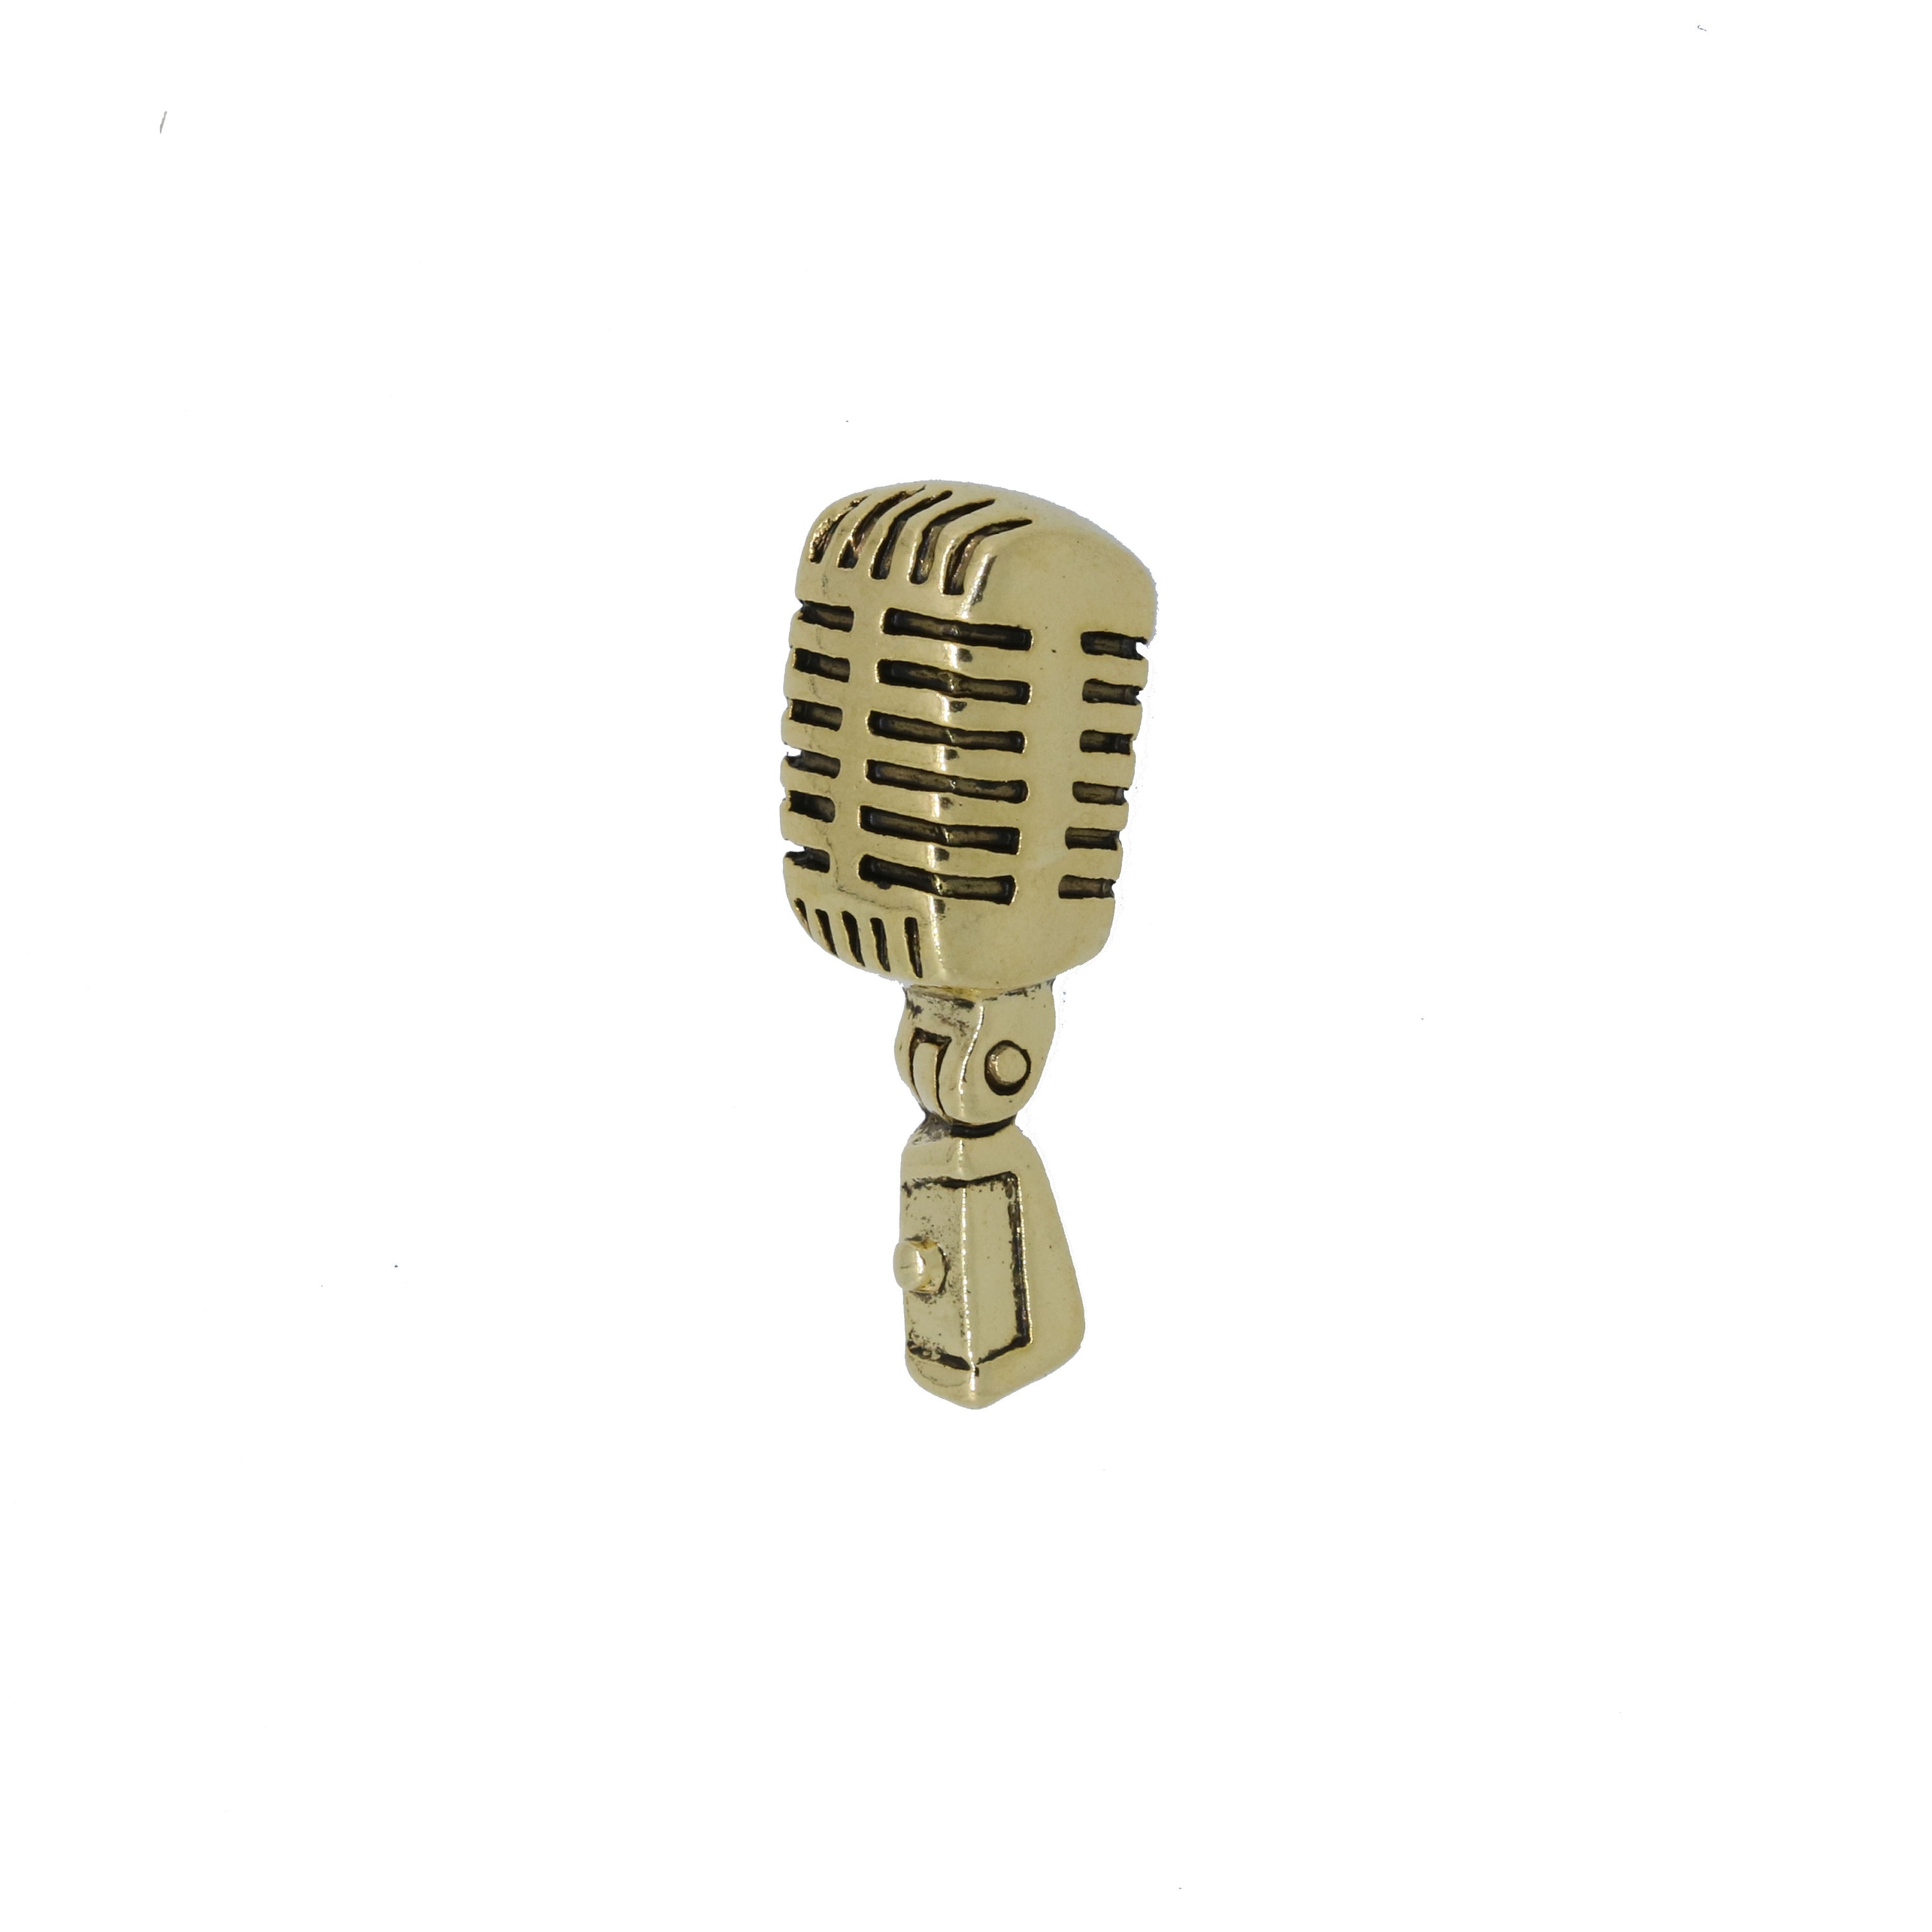 JimClift Gold Microphone Lapel Pin-CC529G- Mic, Broadcast, and Sound Wave Pins for Radio, and Audio Engineering